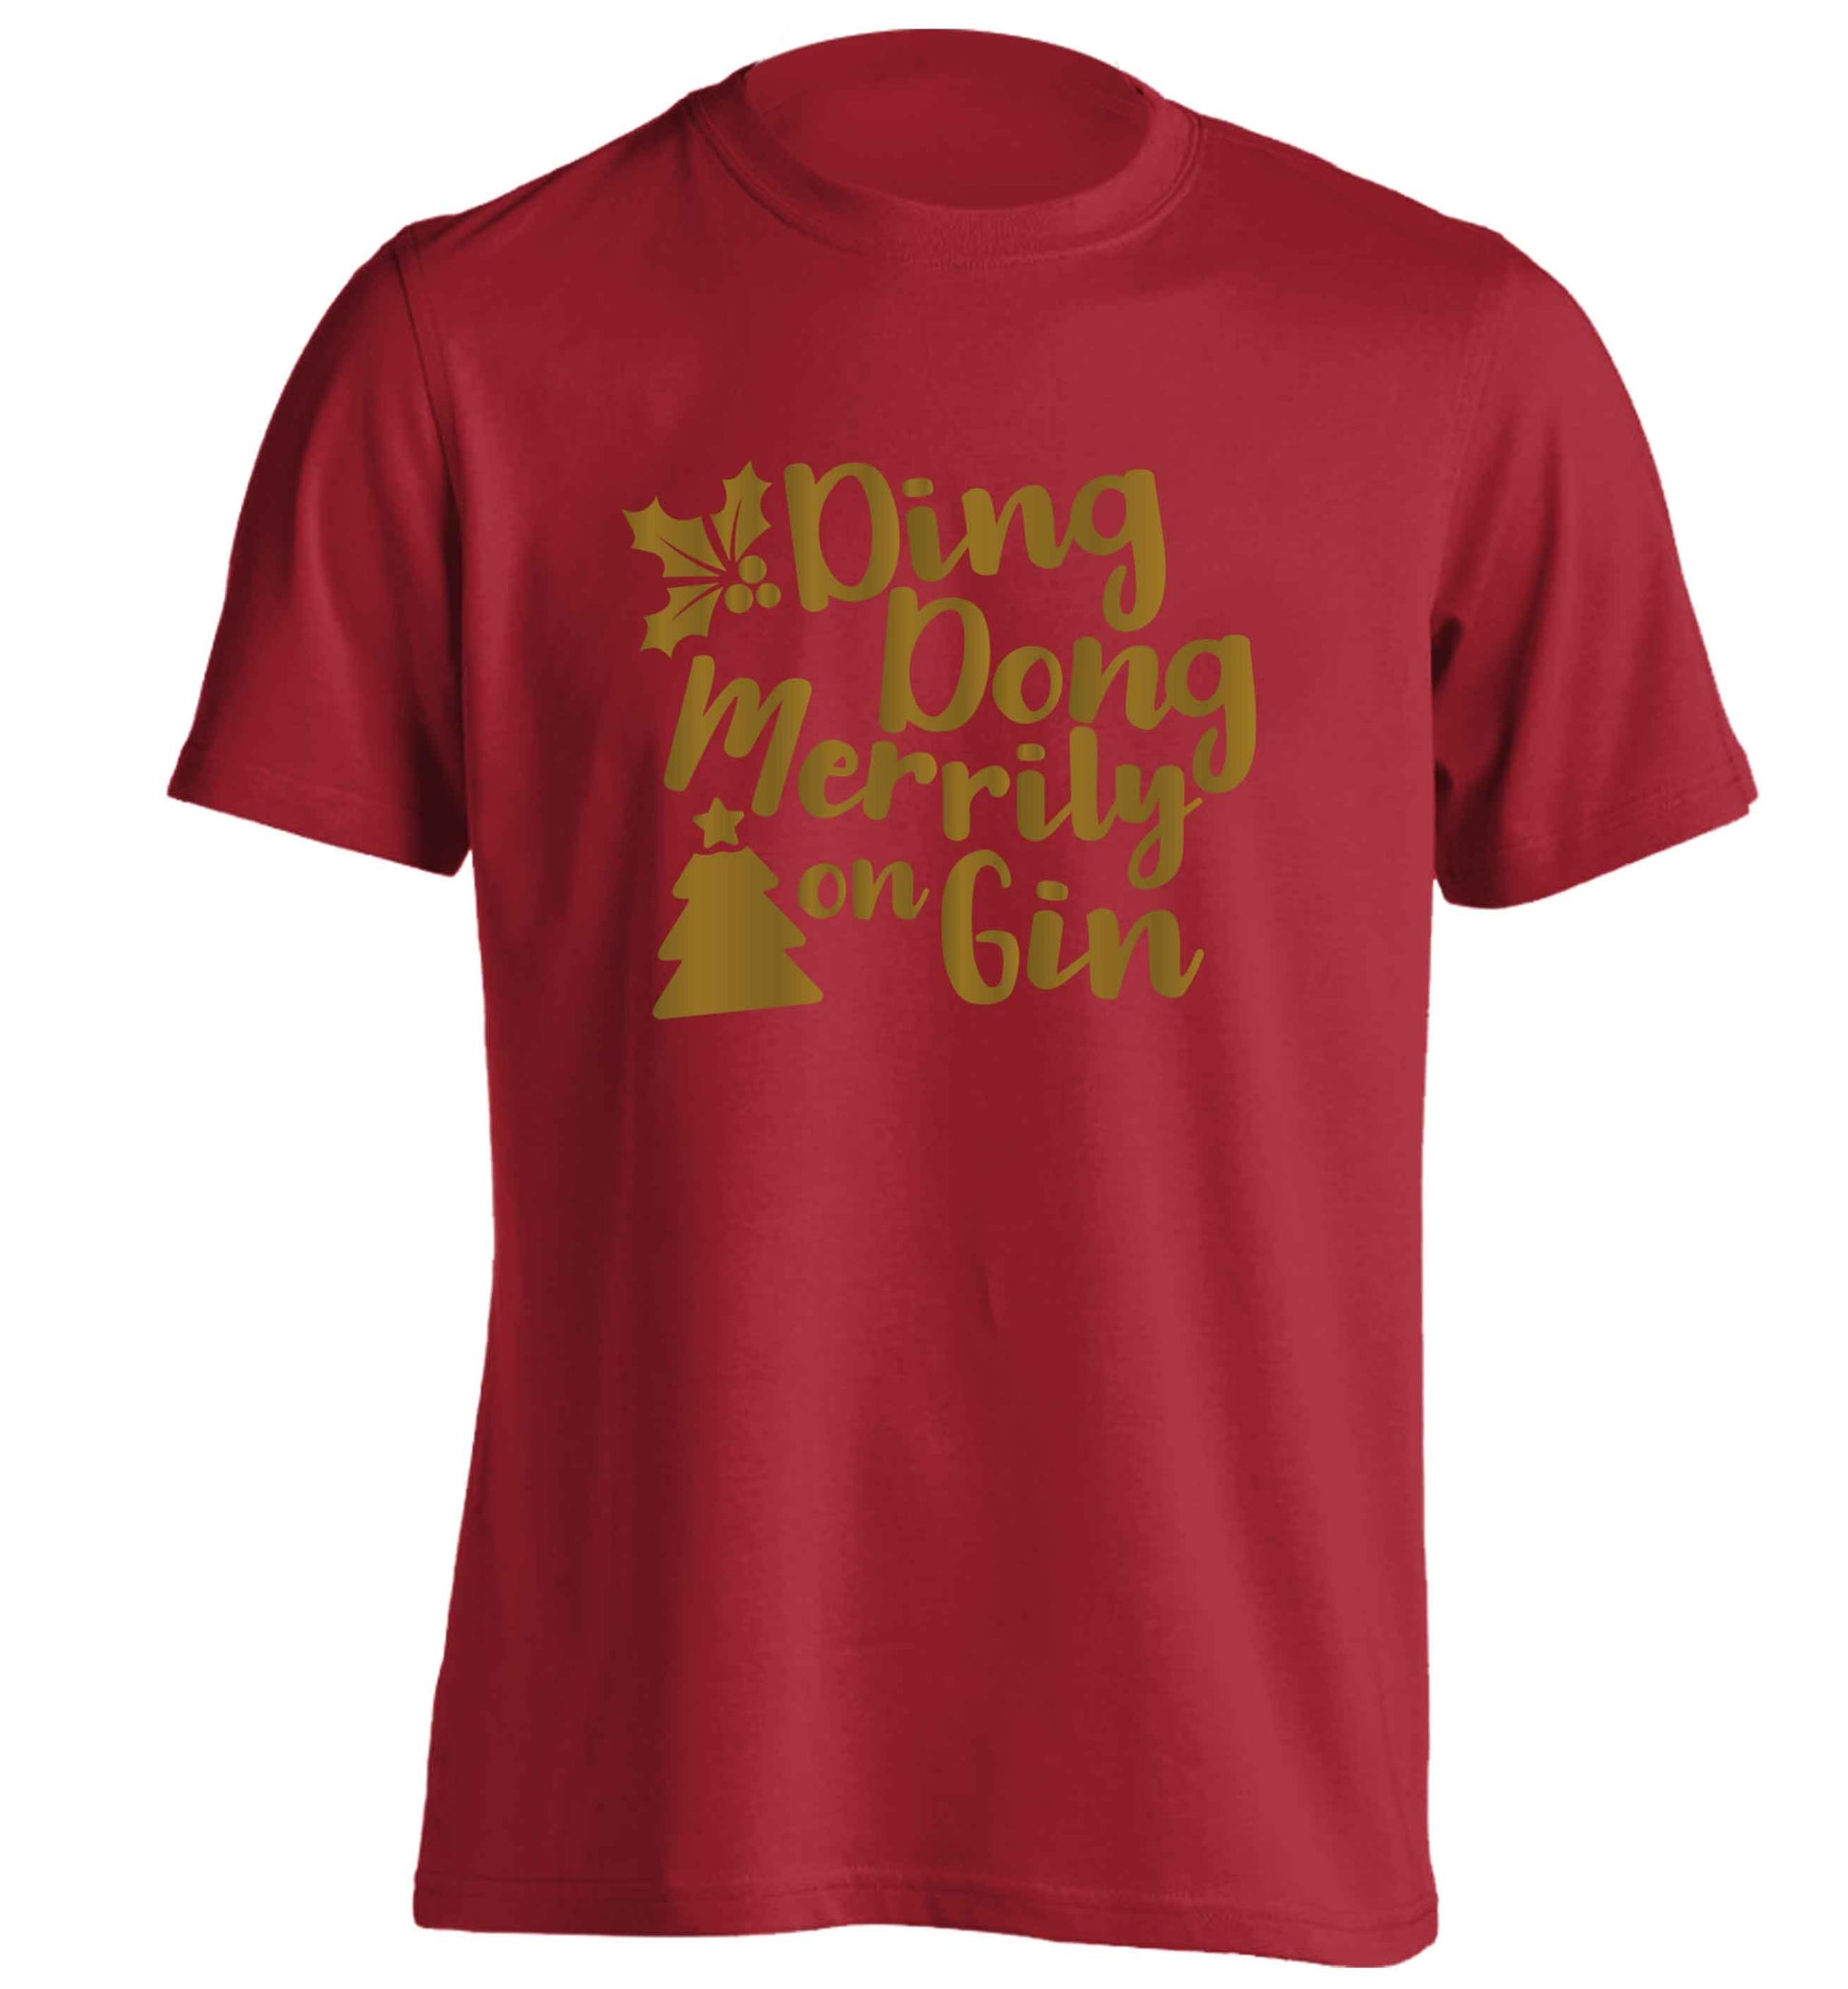 Ding dong merrily on gin adults unisex red Tshirt 2XL